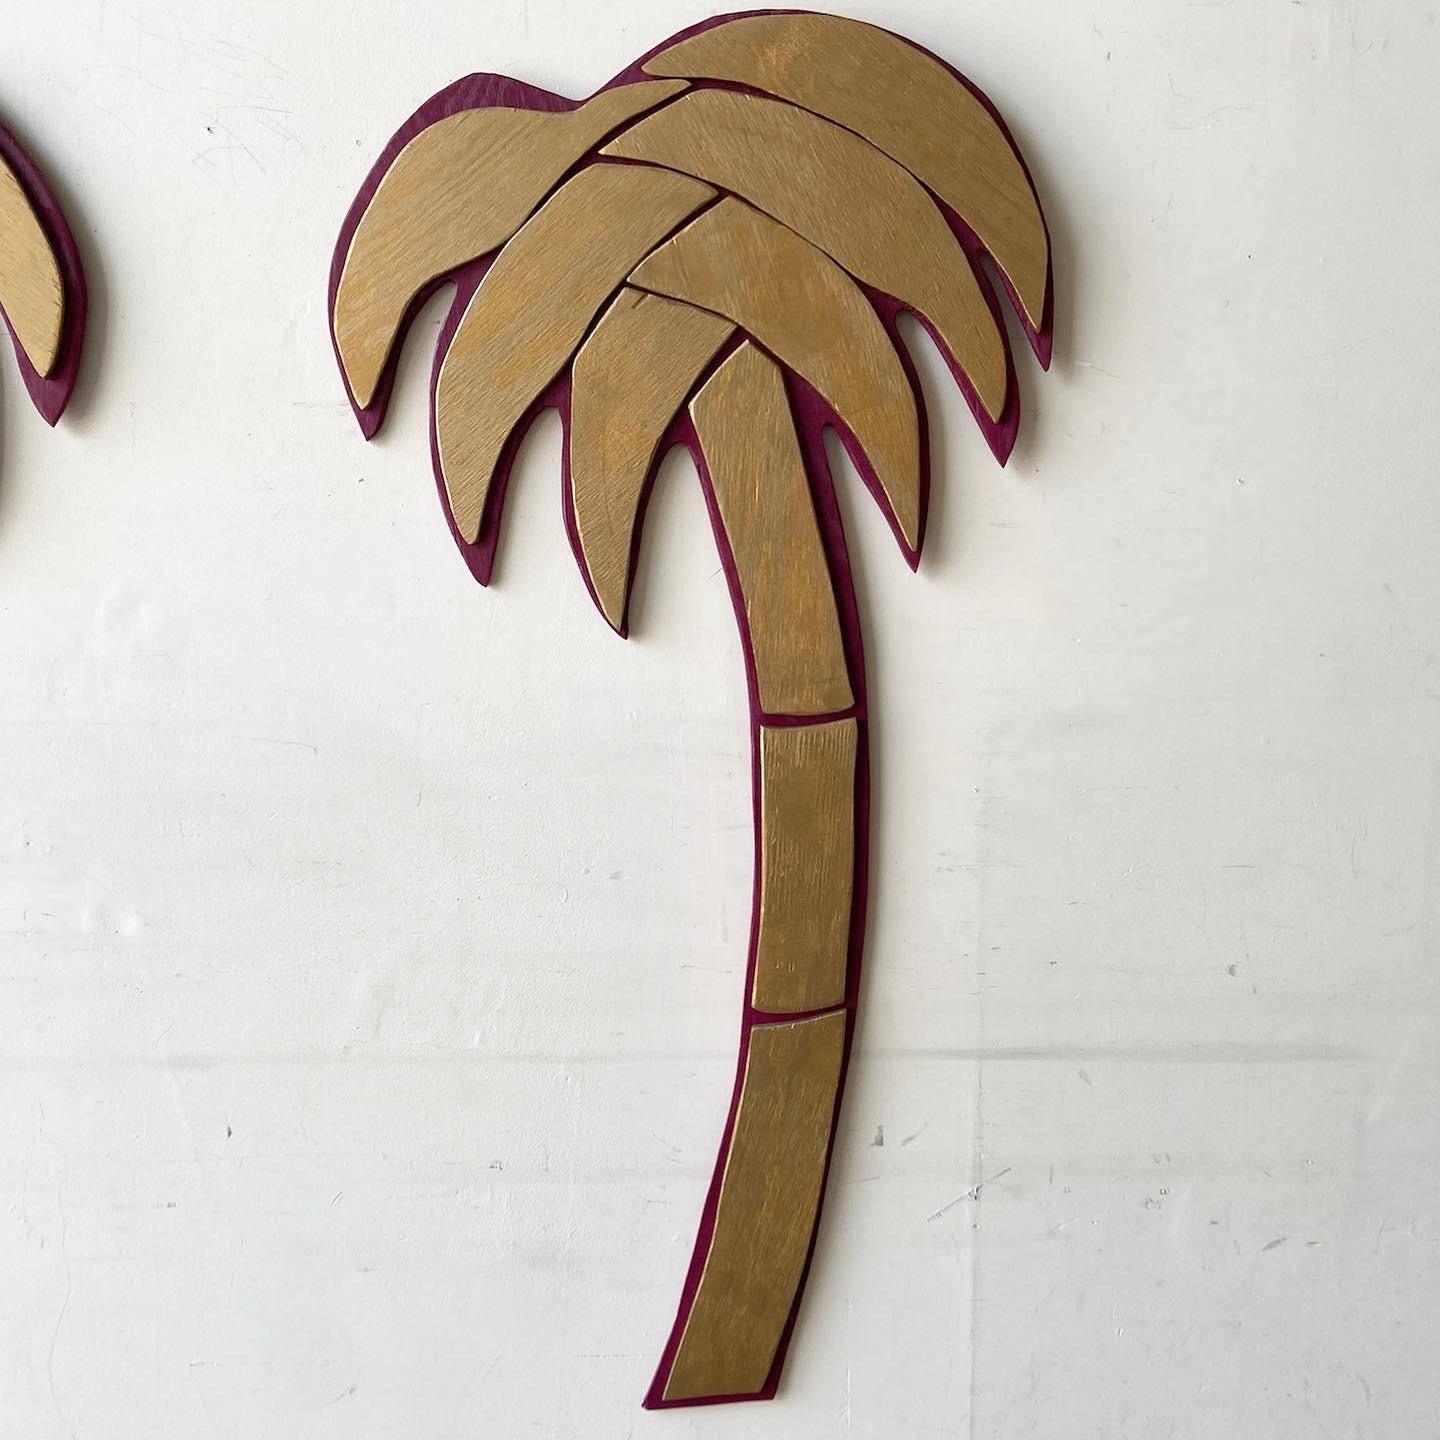 Late 20th Century Postmodern Sculpted Wooden Palm Trees Wall Accessories, a Pair For Sale